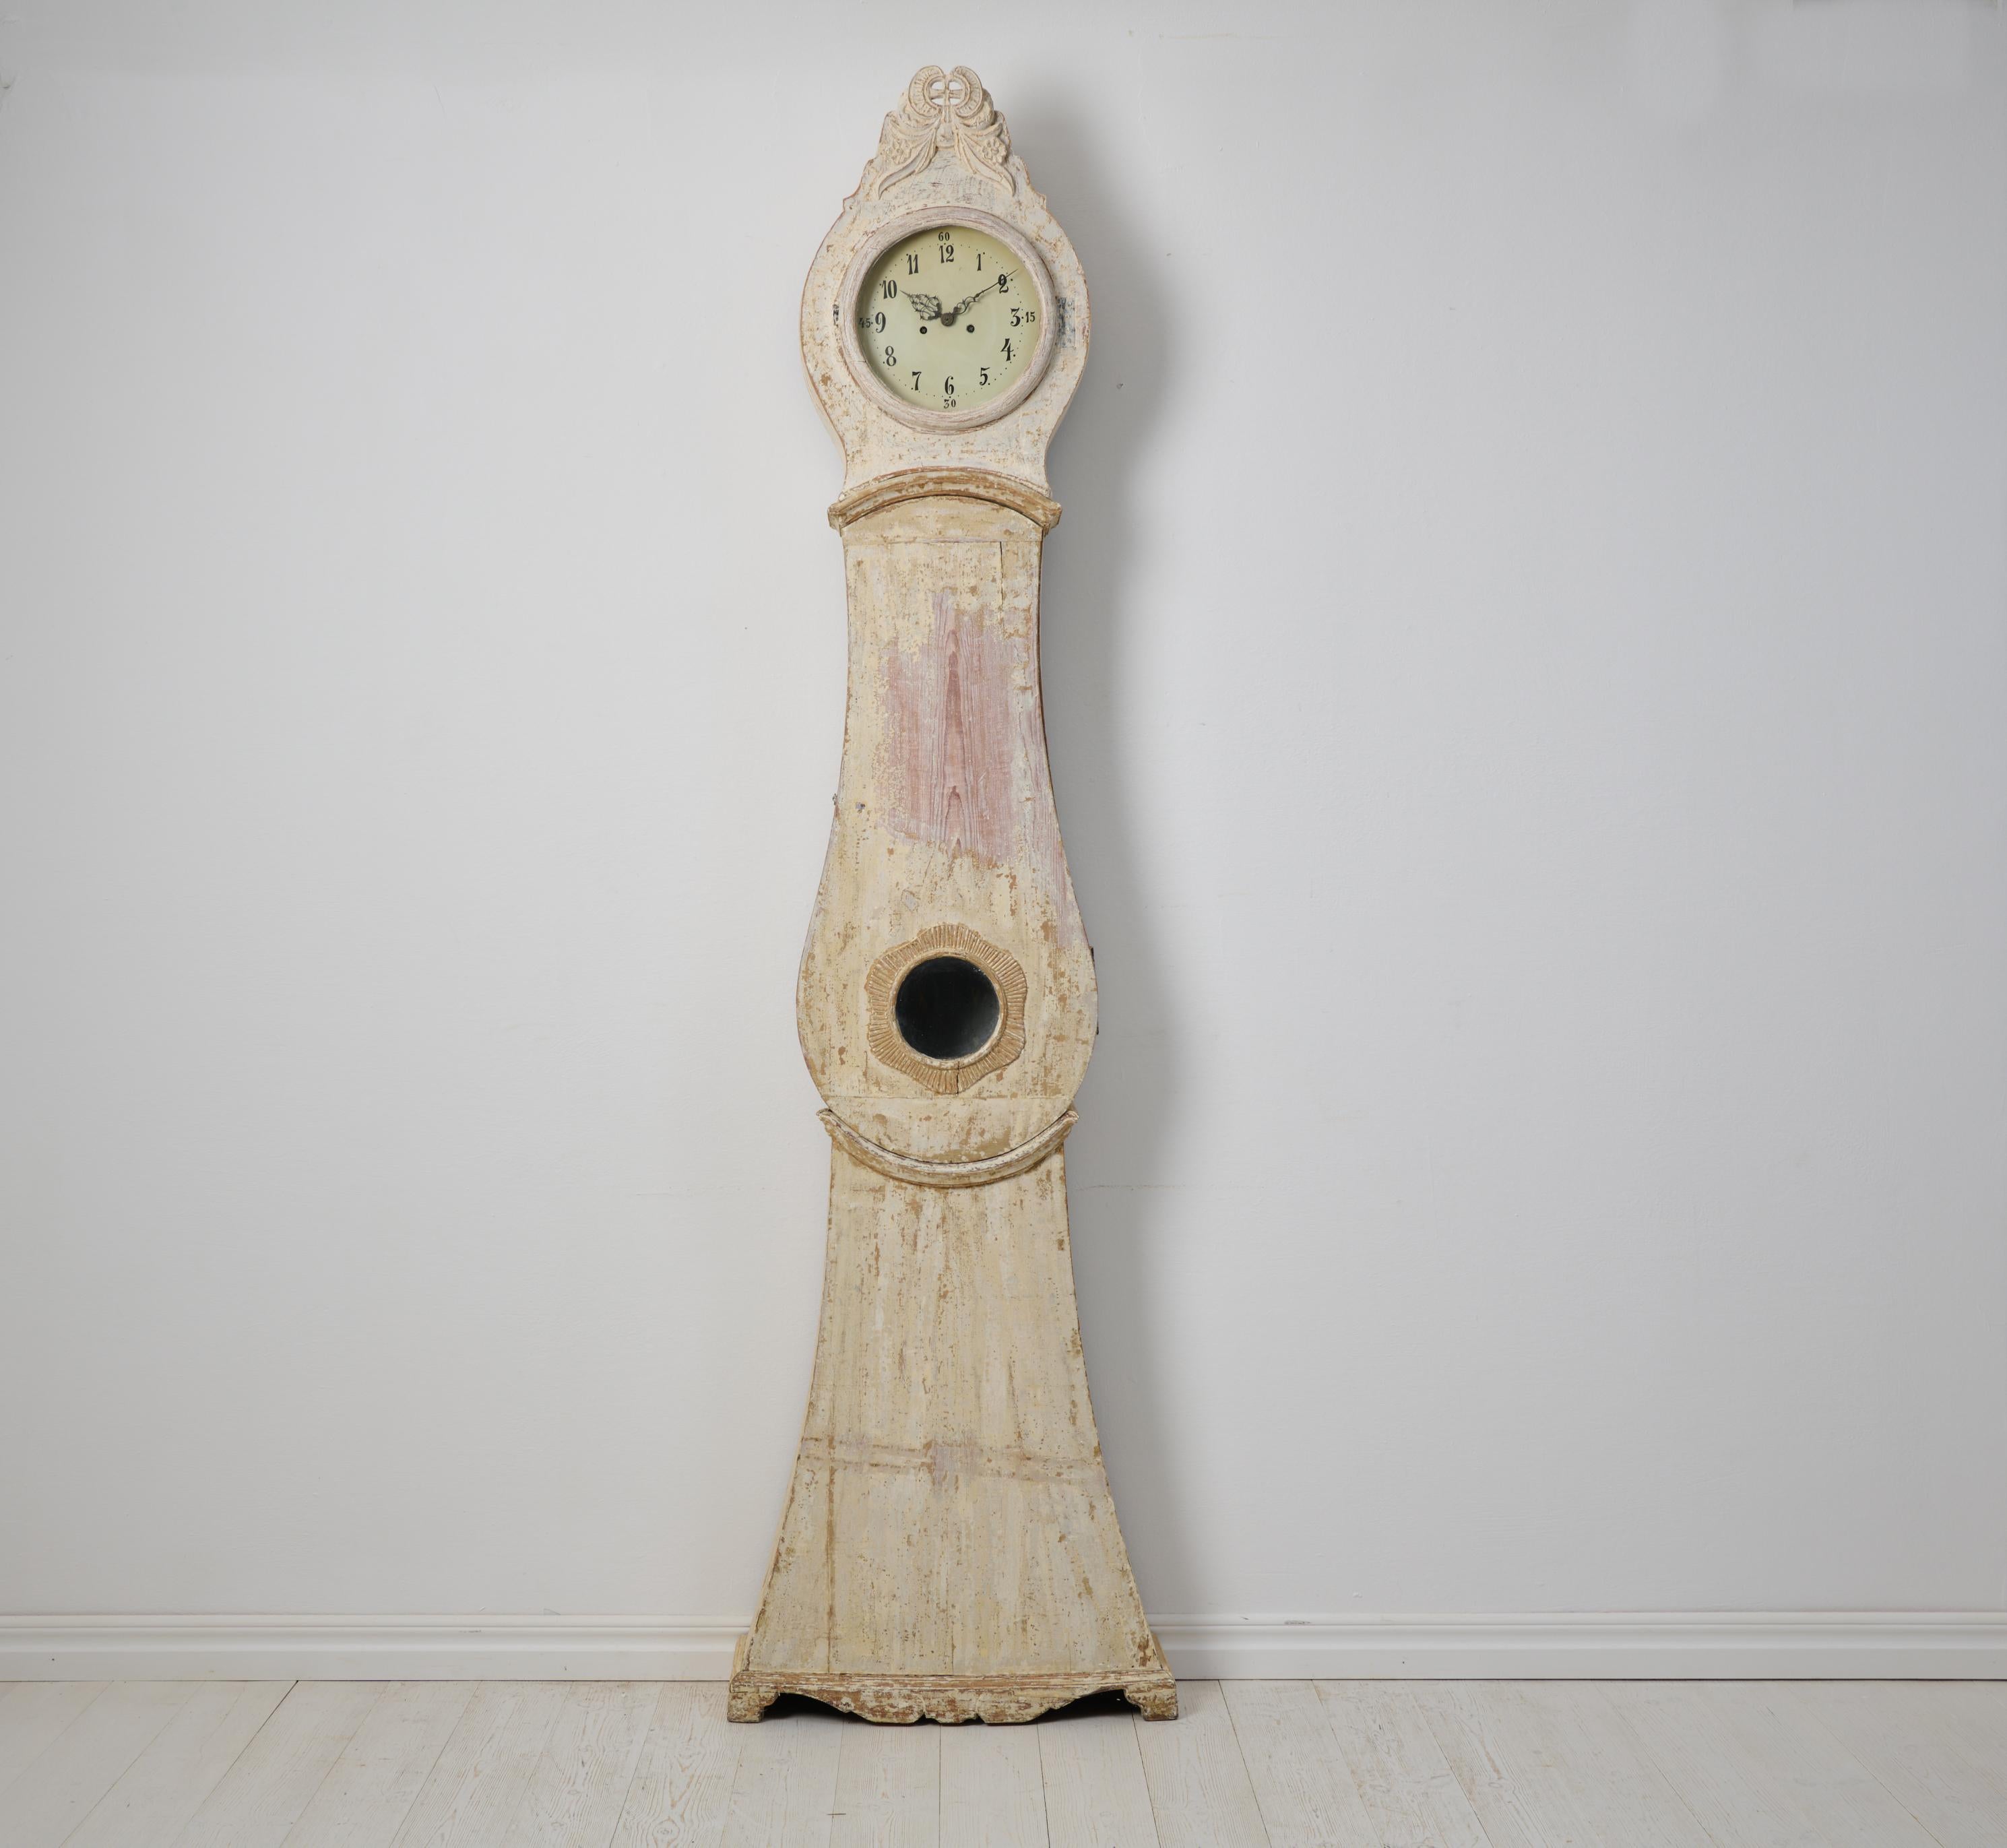 Rare genuine mora clock from northern Sweden. Unlock the enchantment of history with this rare genuine mora clock from northern Sweden, crafted around 1820. The case, meticulously made in solid pine, stands as a testament to the craftsmanship of its